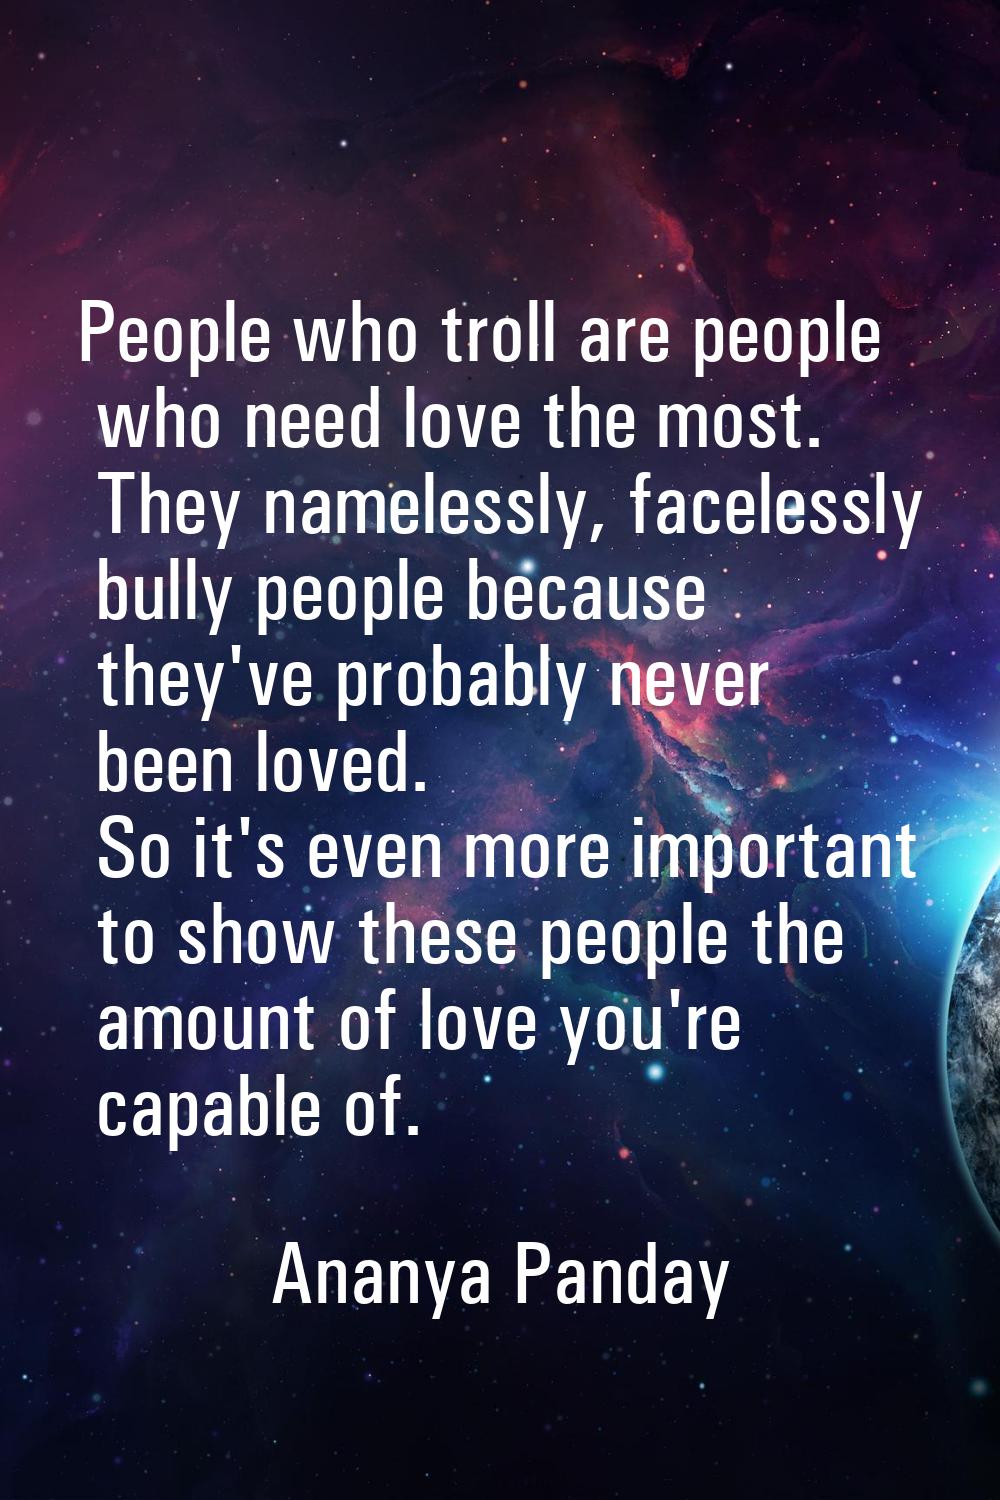 People who troll are people who need love the most. They namelessly, facelessly bully people becaus